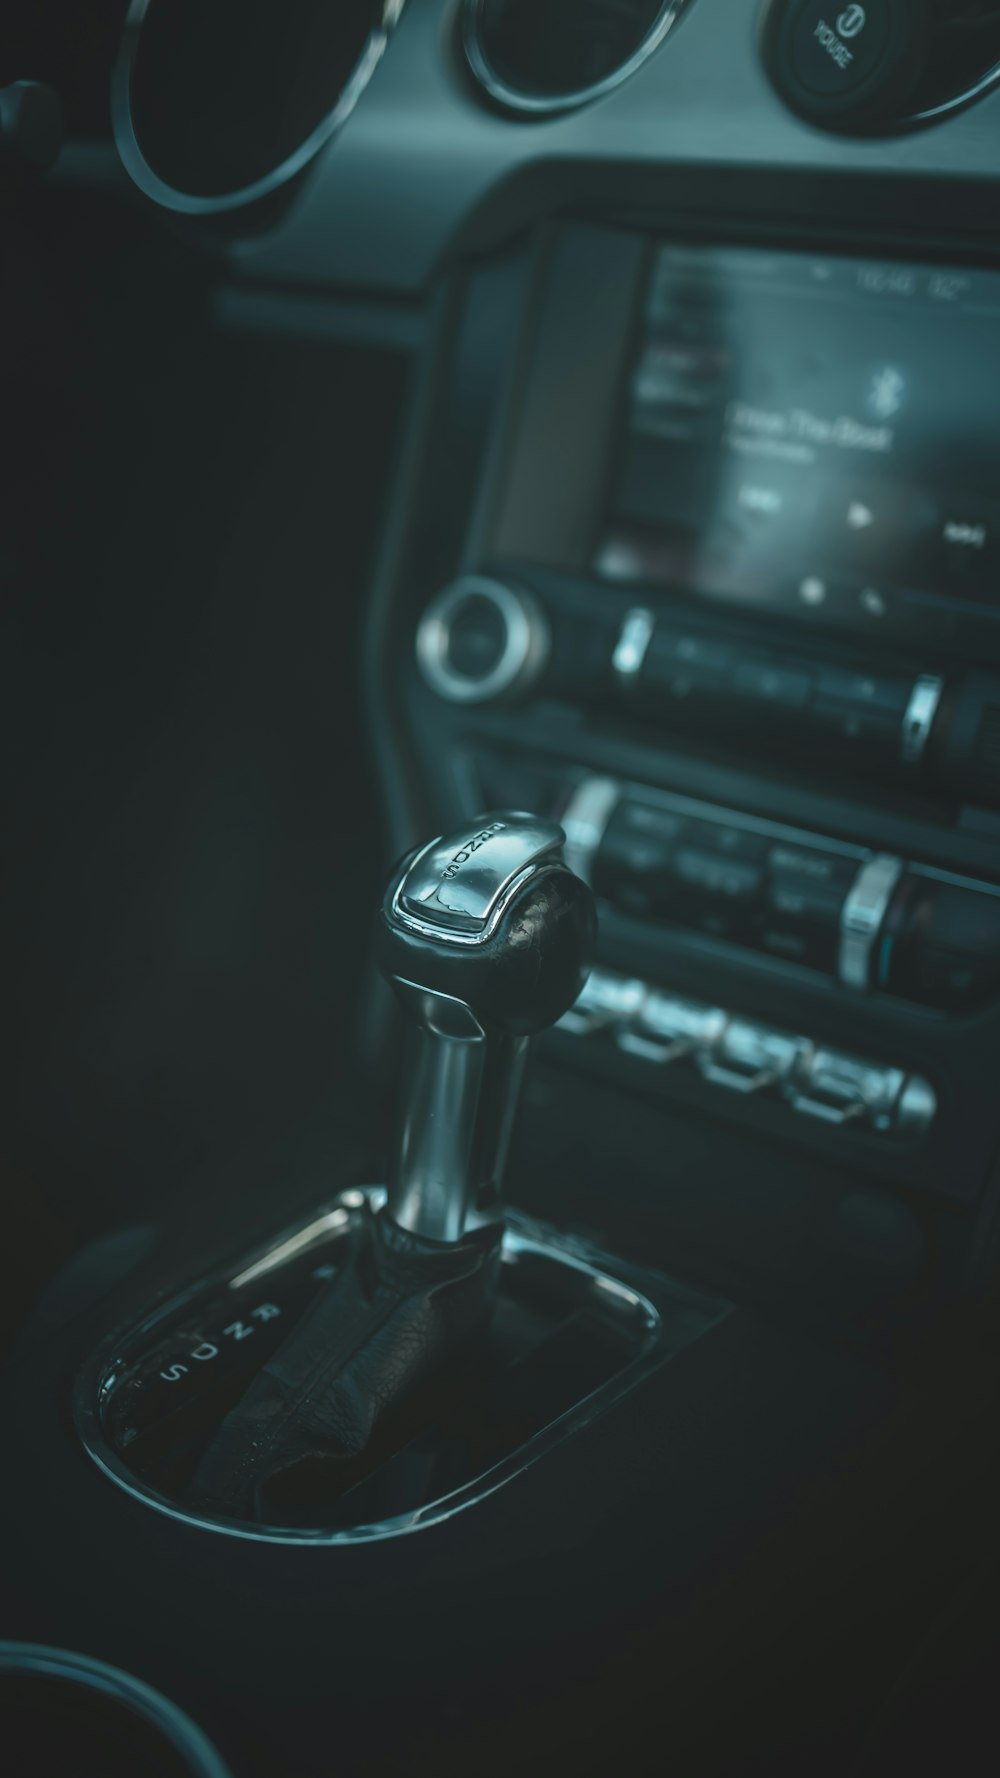 black and gray car gear shift lever